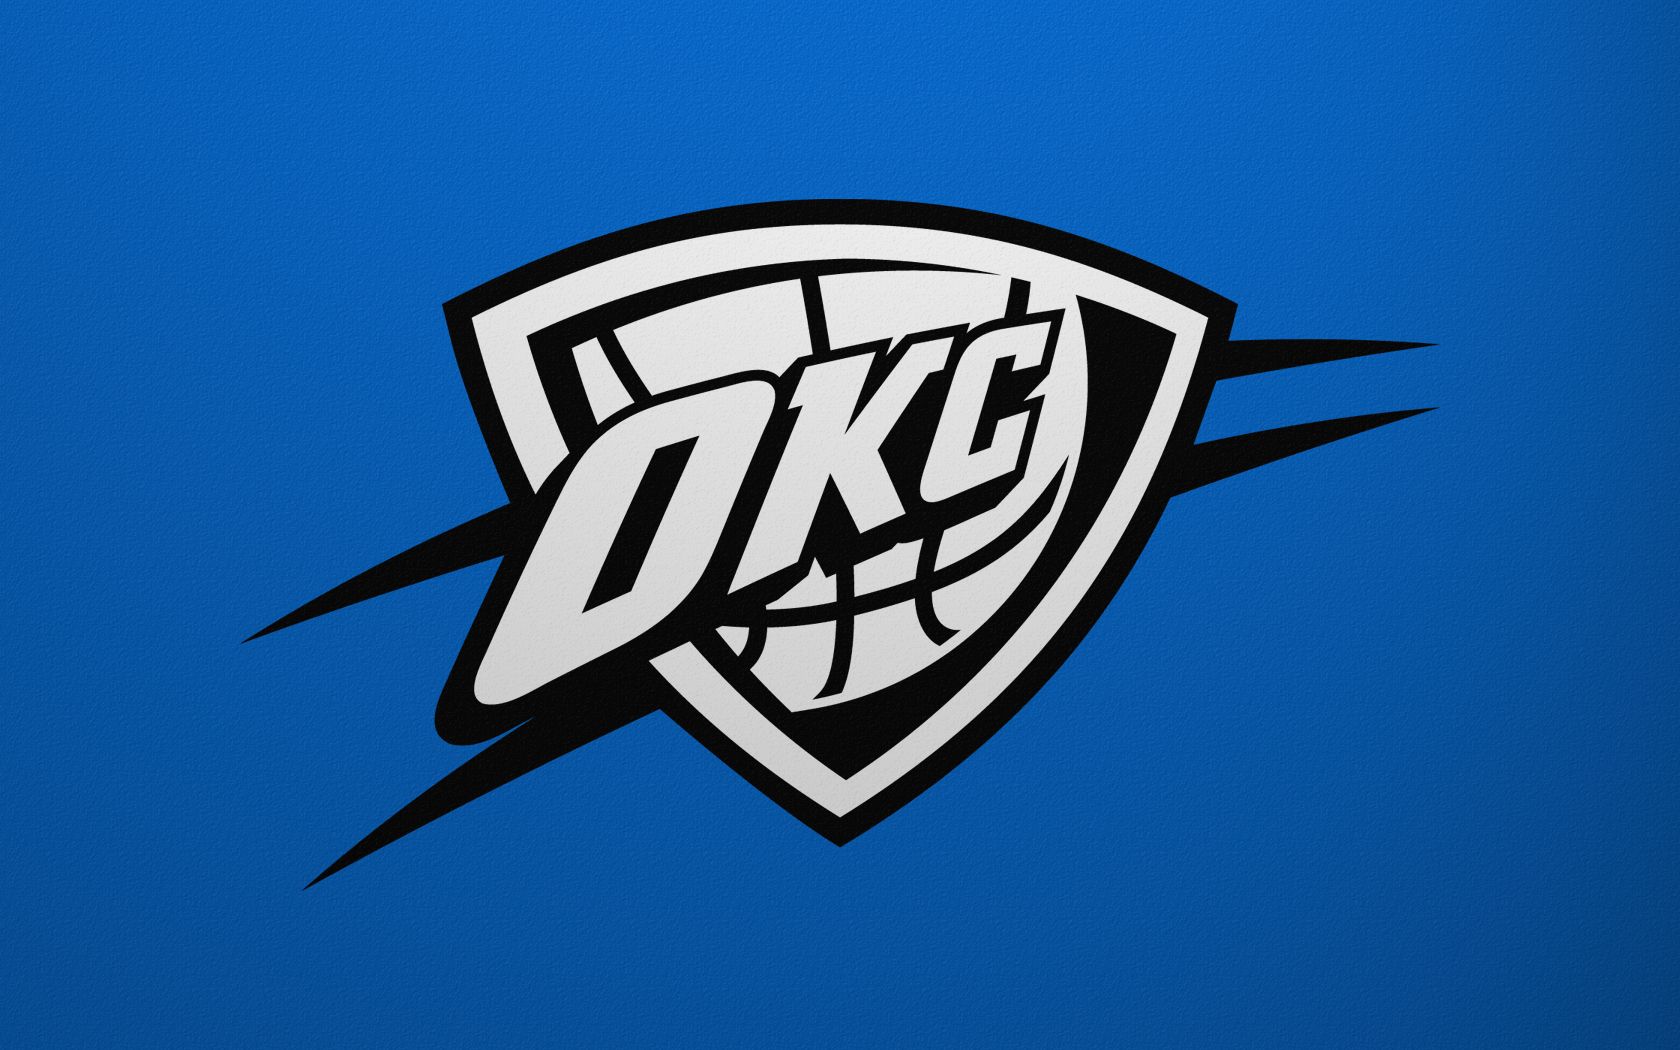 2014 OKC Thunder Playoff Wallpaper Round 1, Game 1 From the